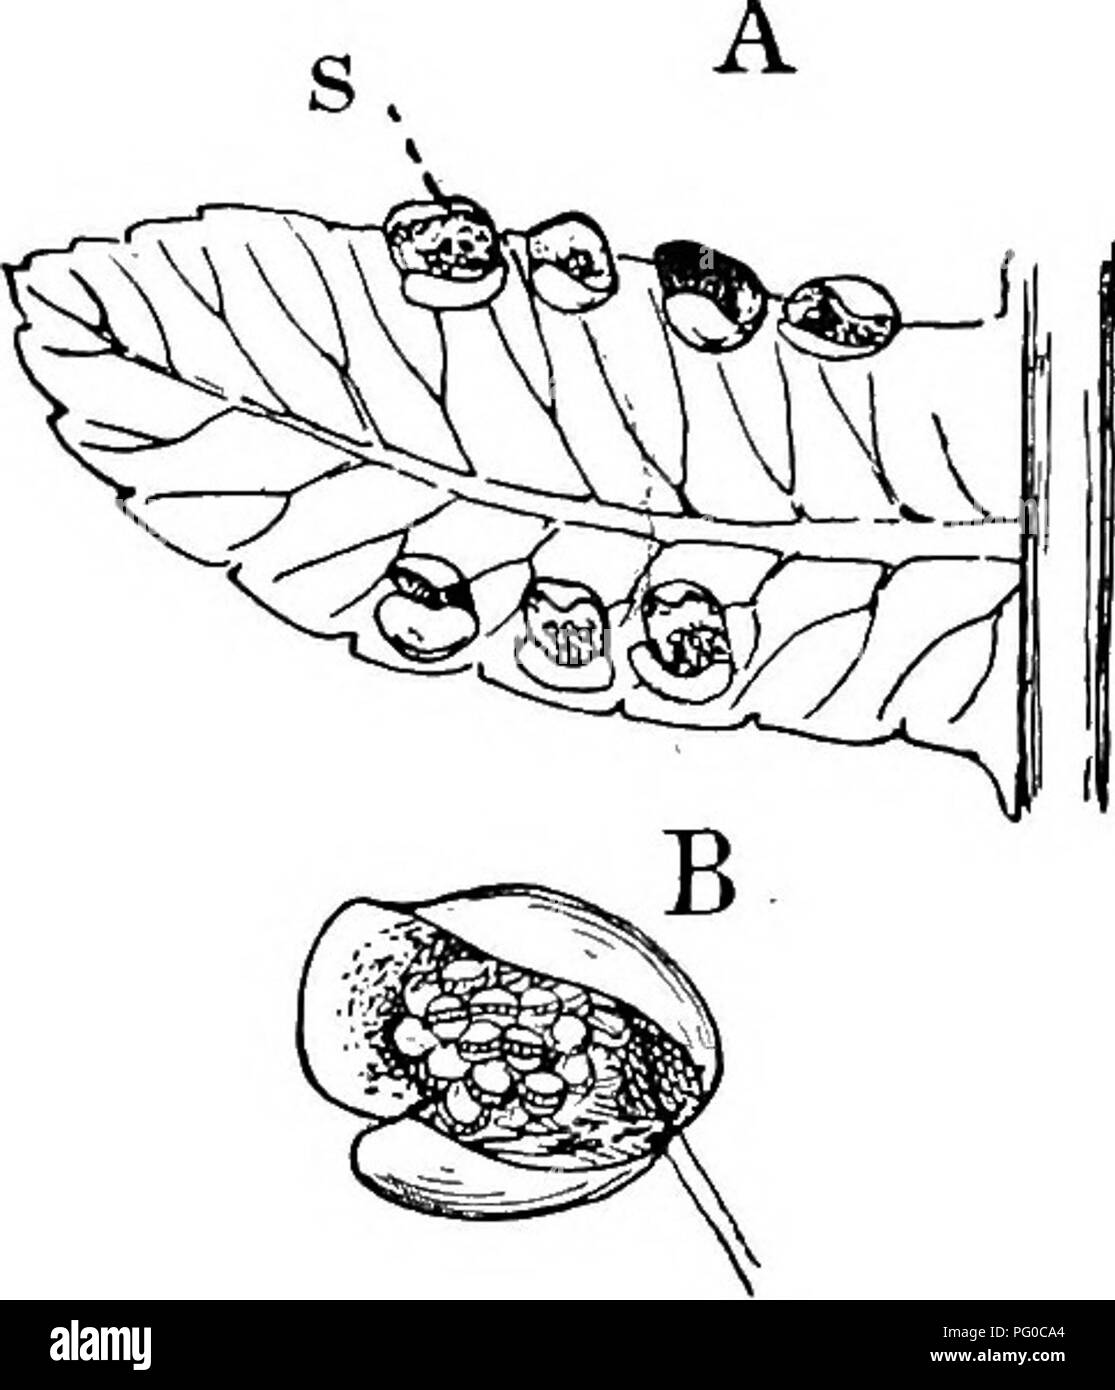 . The structure and development of mosses and ferns (Archegoniatae). Plant morphology; Mosses; Ferns. FlG. 227.—Cibotium Memiesii. A, Pinnule with the sori is), X3; B, a single sorus showing the two-valved indusium, X9;- C, a single sporangium, X80; r, the annulus; D, a paraphysis, X8o. dium, less so in Schiscea, where the sporangia are smaller, and the mother cells project much more strongly. The early divi- sions correspond closely with those of the Hymenophyllaceas, and as there the tapetum is massive and two-layered, and the stalk of the sporangium very short. The wall is derived in The di Stock Photo